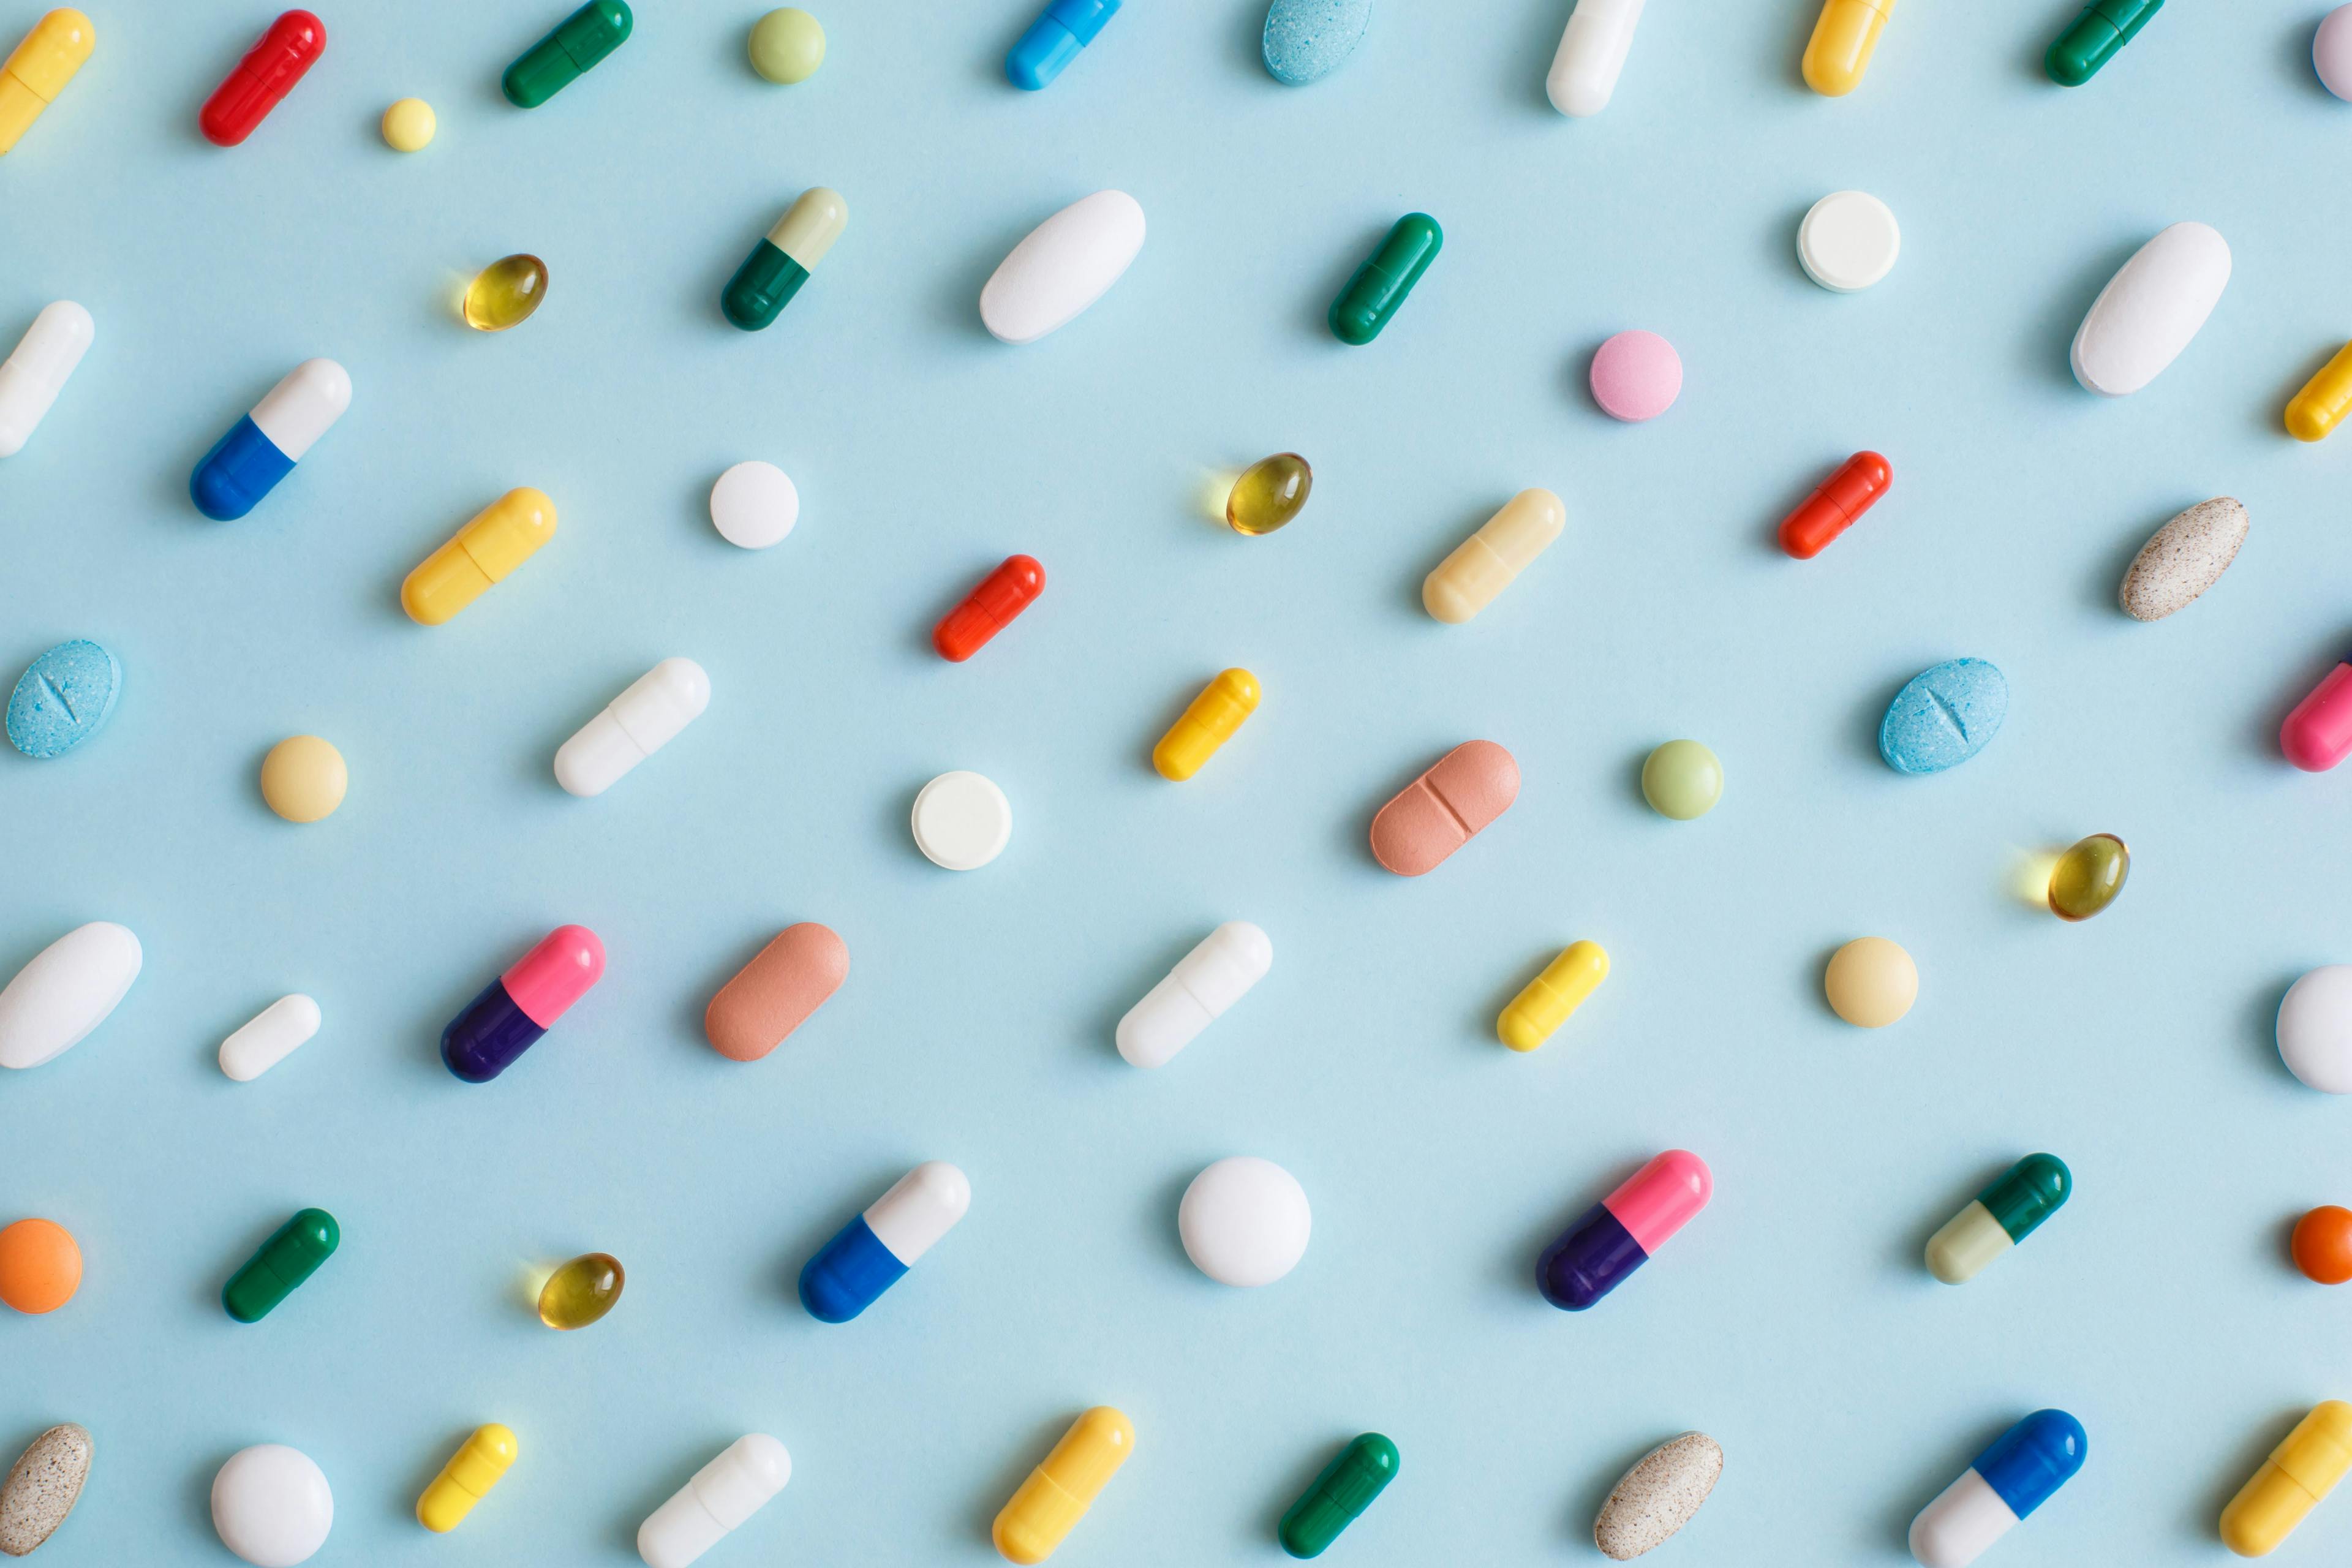 Creative layout of colorful pills and capsules on blue background. Minimal medical concept. Pharmaceutical, Covid-19 or Coronavirus. Flat lay, top | Image Credit: © Tatiana - stock.adobe.com